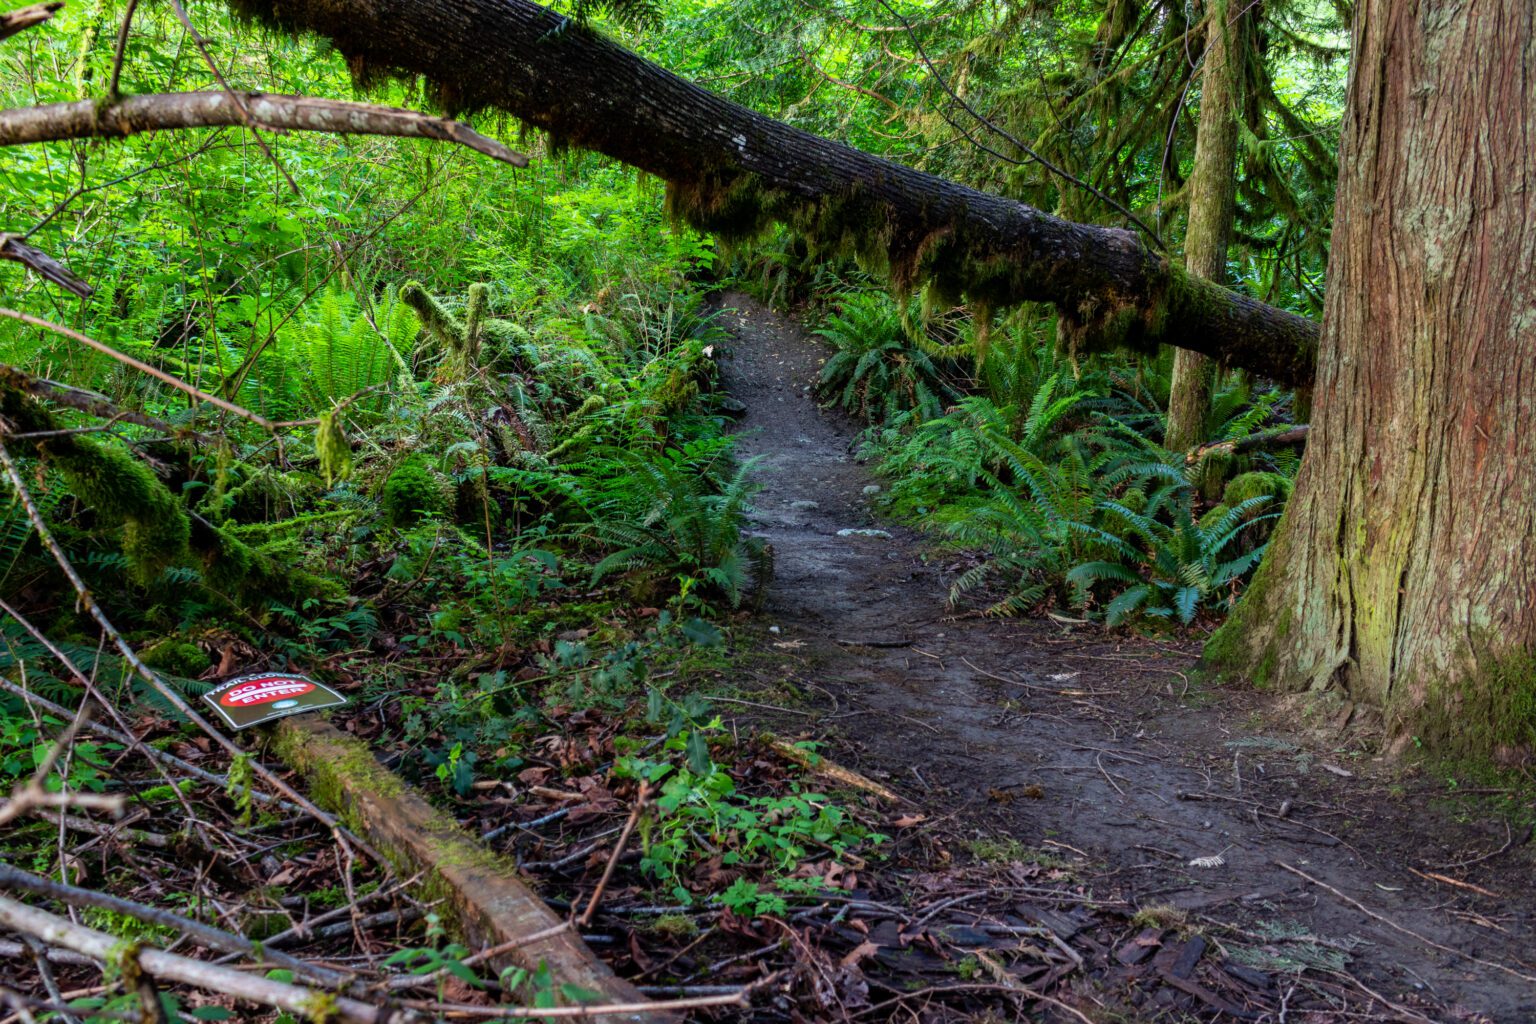 The unsanctioned trail Surfin' Turf was closed by Whatcom County